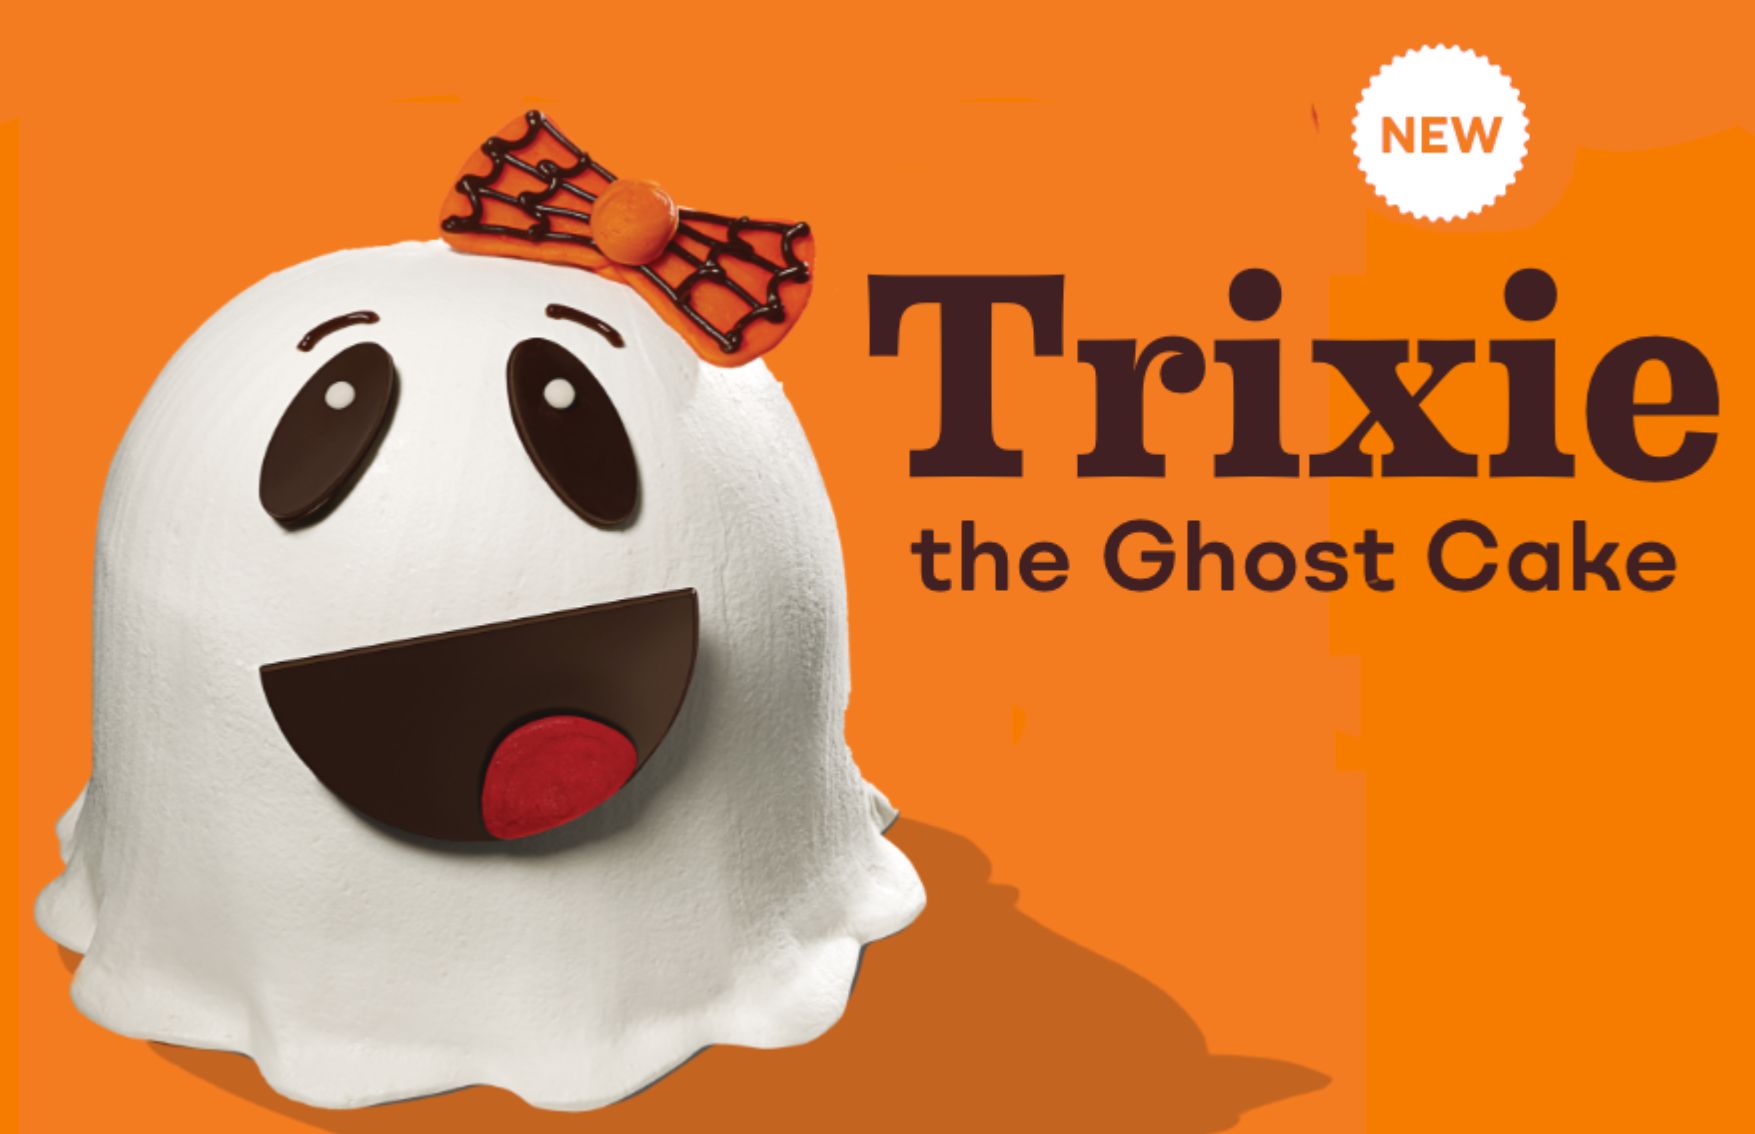 Baskin Robbins Tricks Out Their New Trixie The Ghost Cake This Halloween